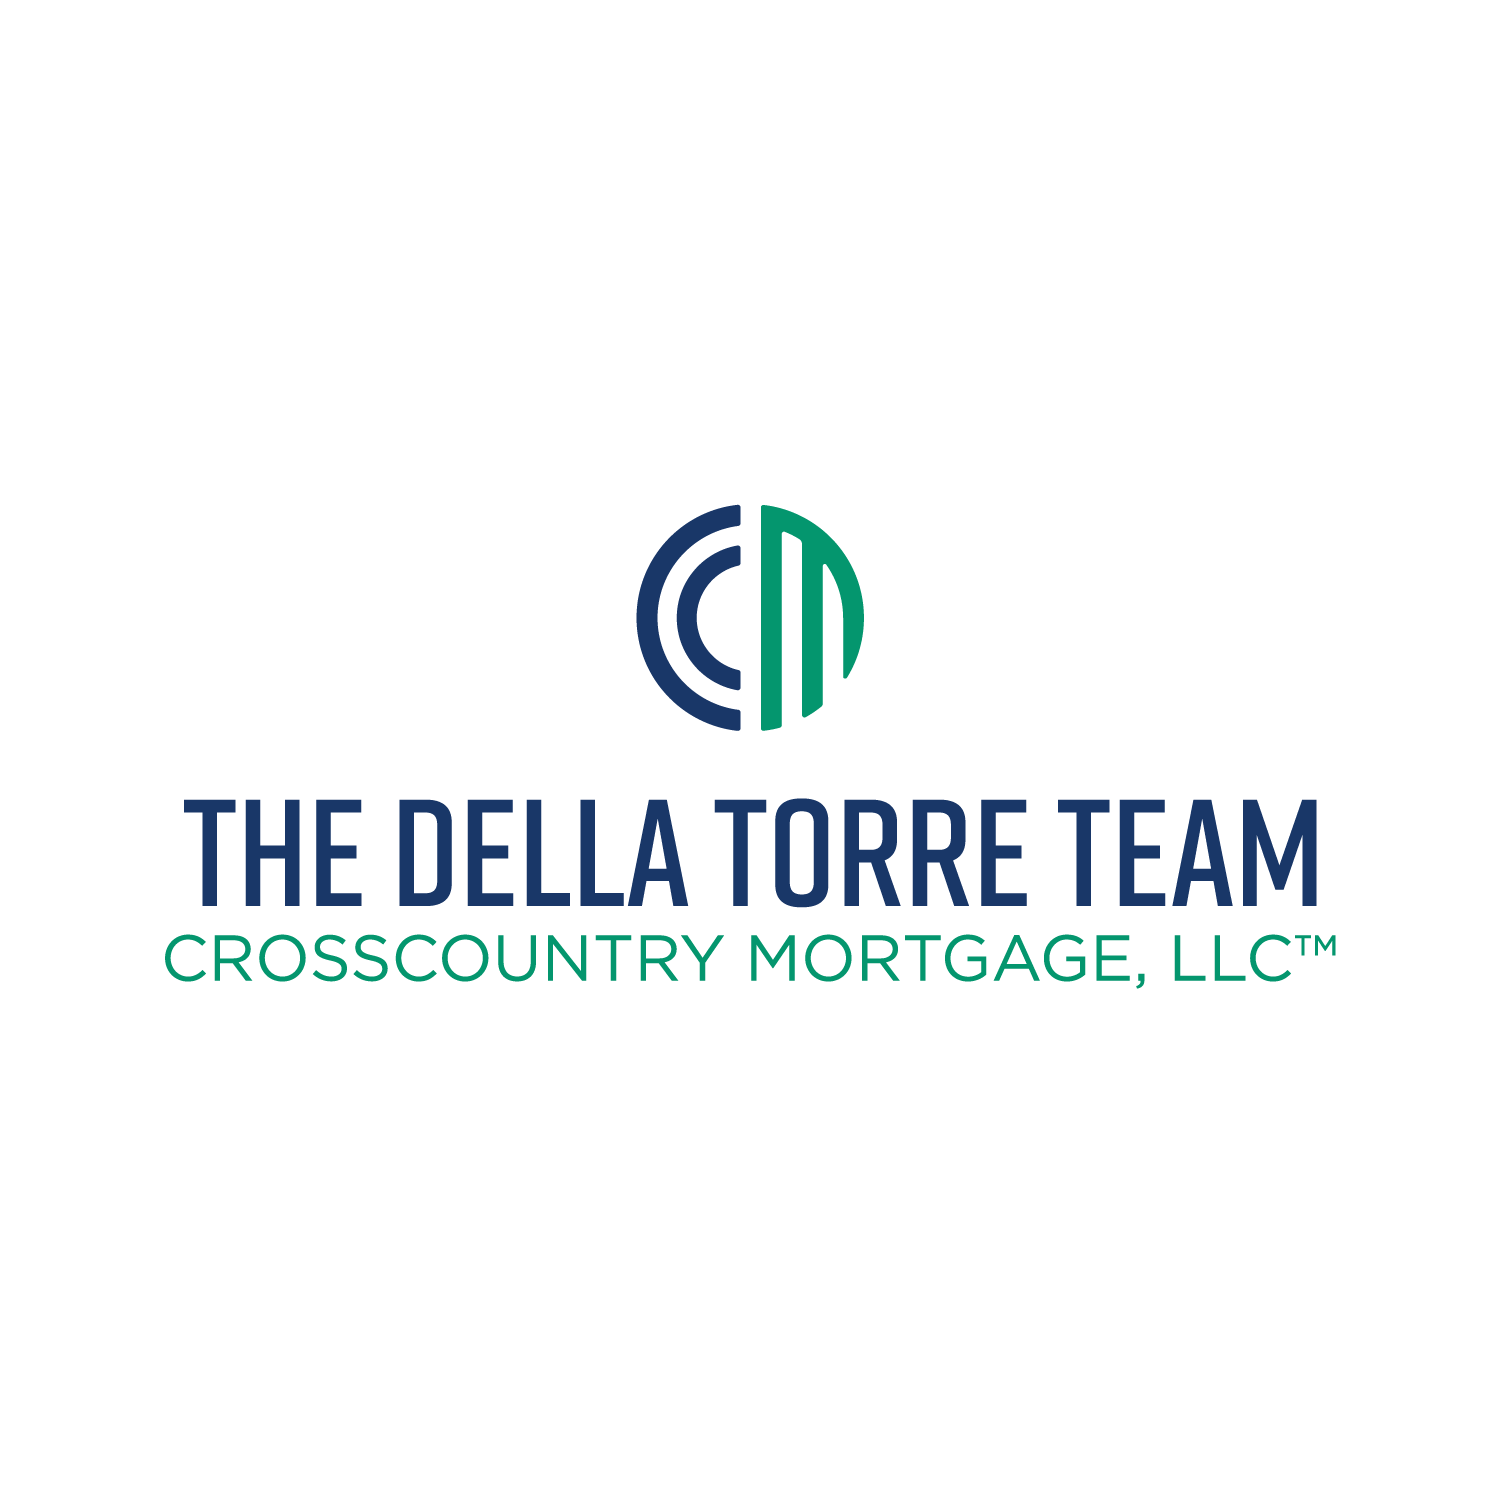 The Dellatorre Team at Cross Country Mortgage